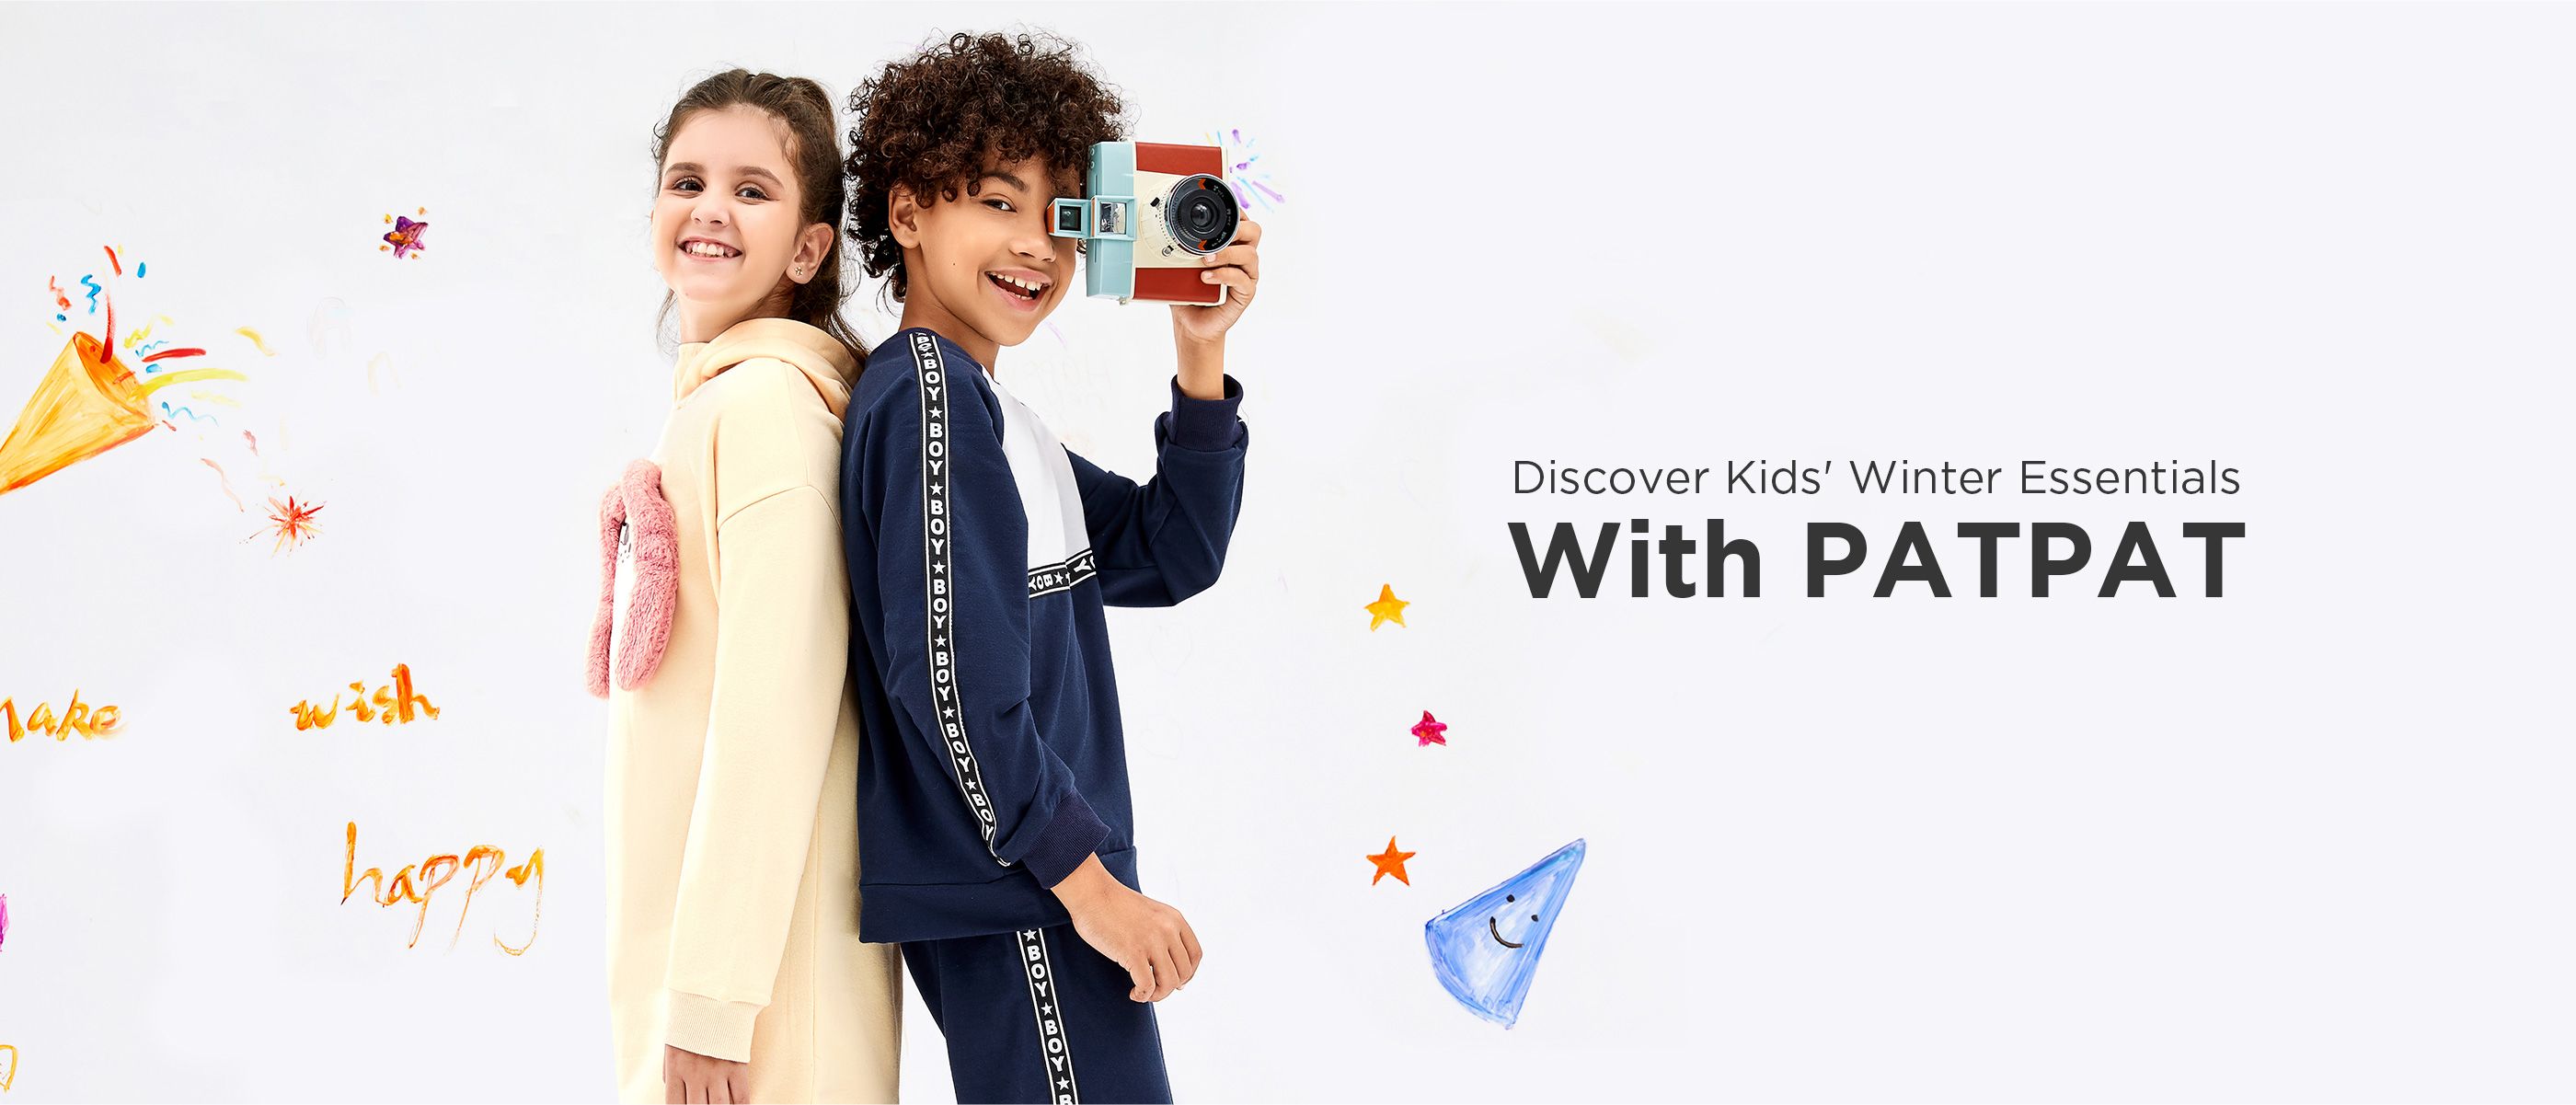 Discover Kids' Winter Essentials With PATPAT.